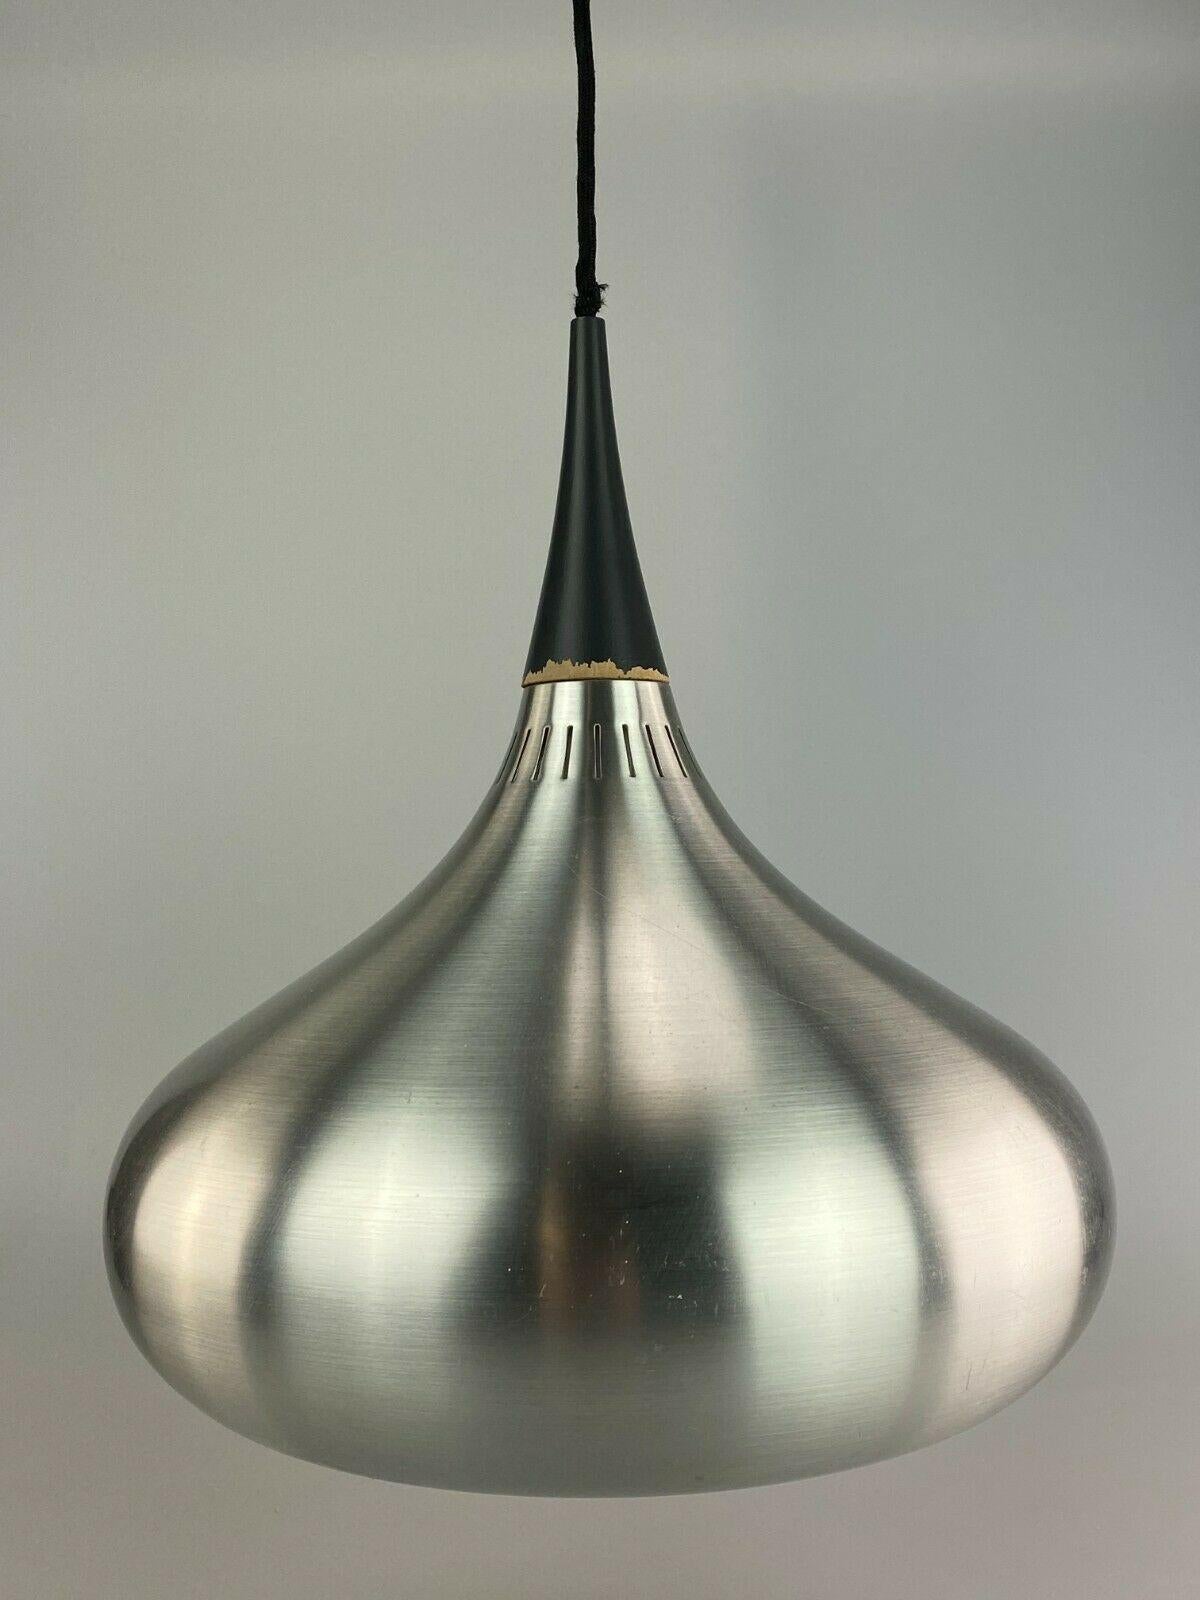 60s 70s Lamp Light Ceiling Lamp Sheet Metal Space Age Danish Denmark Design In Fair Condition For Sale In Neuenkirchen, NI